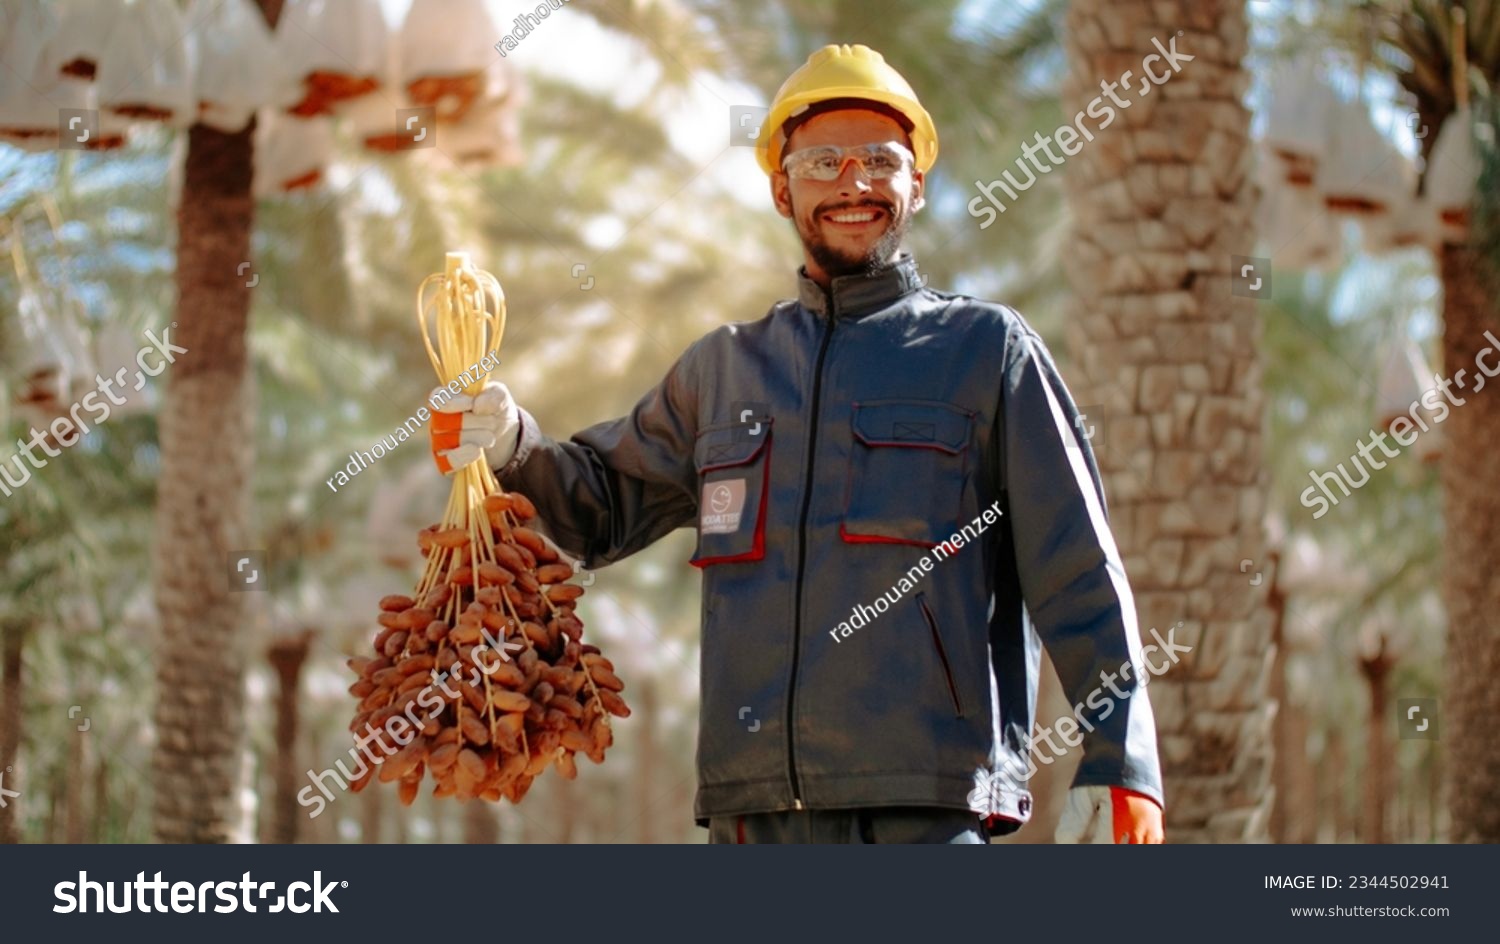 a man wearing a hard hat and holding bananas